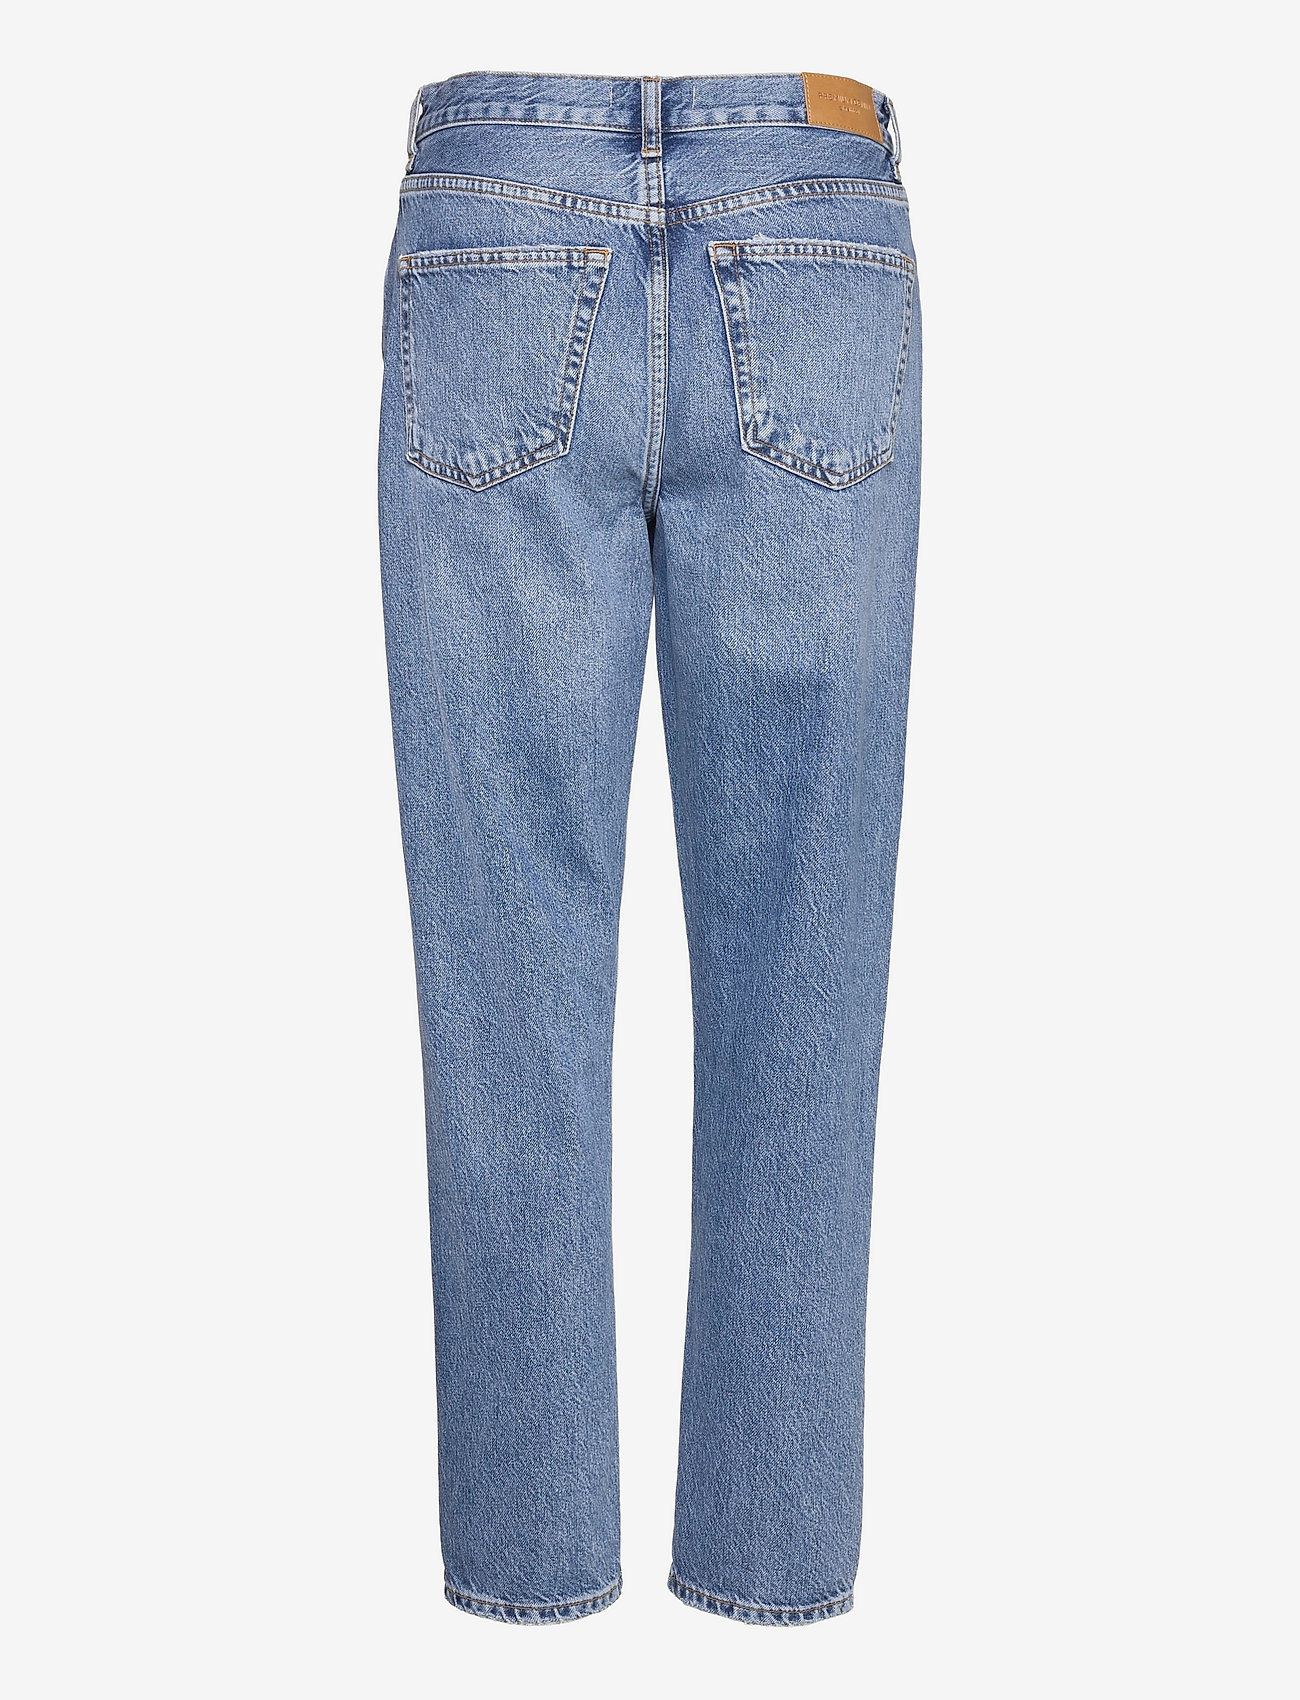 Gina Tricot - Original straight jeans - straight jeans - mid blue - 1